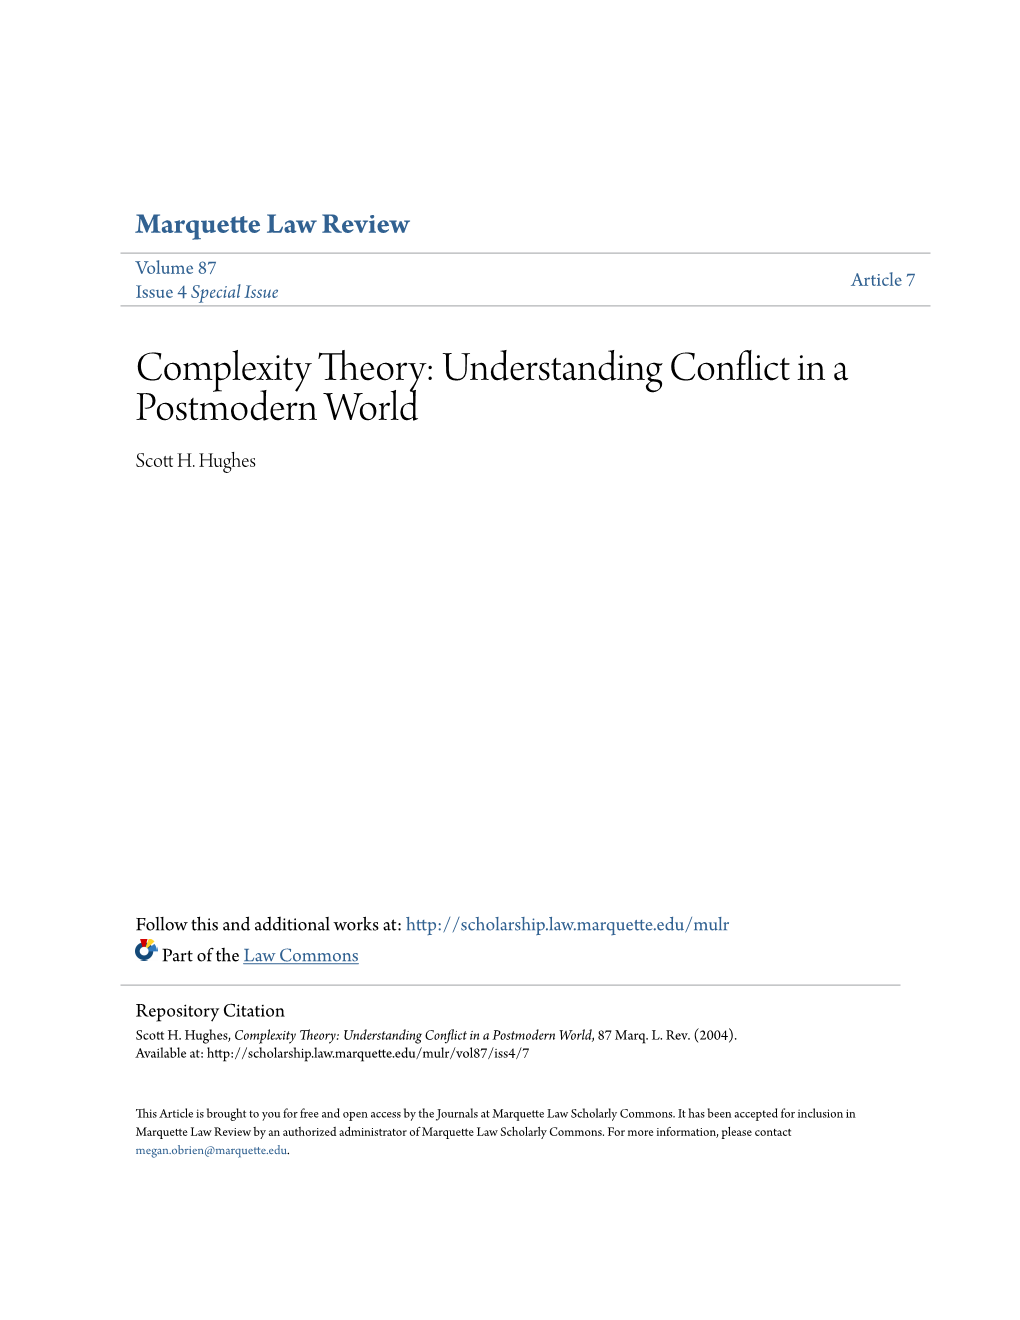 Complexity Theory: Understanding Conflict in a Postmodern World Scott H